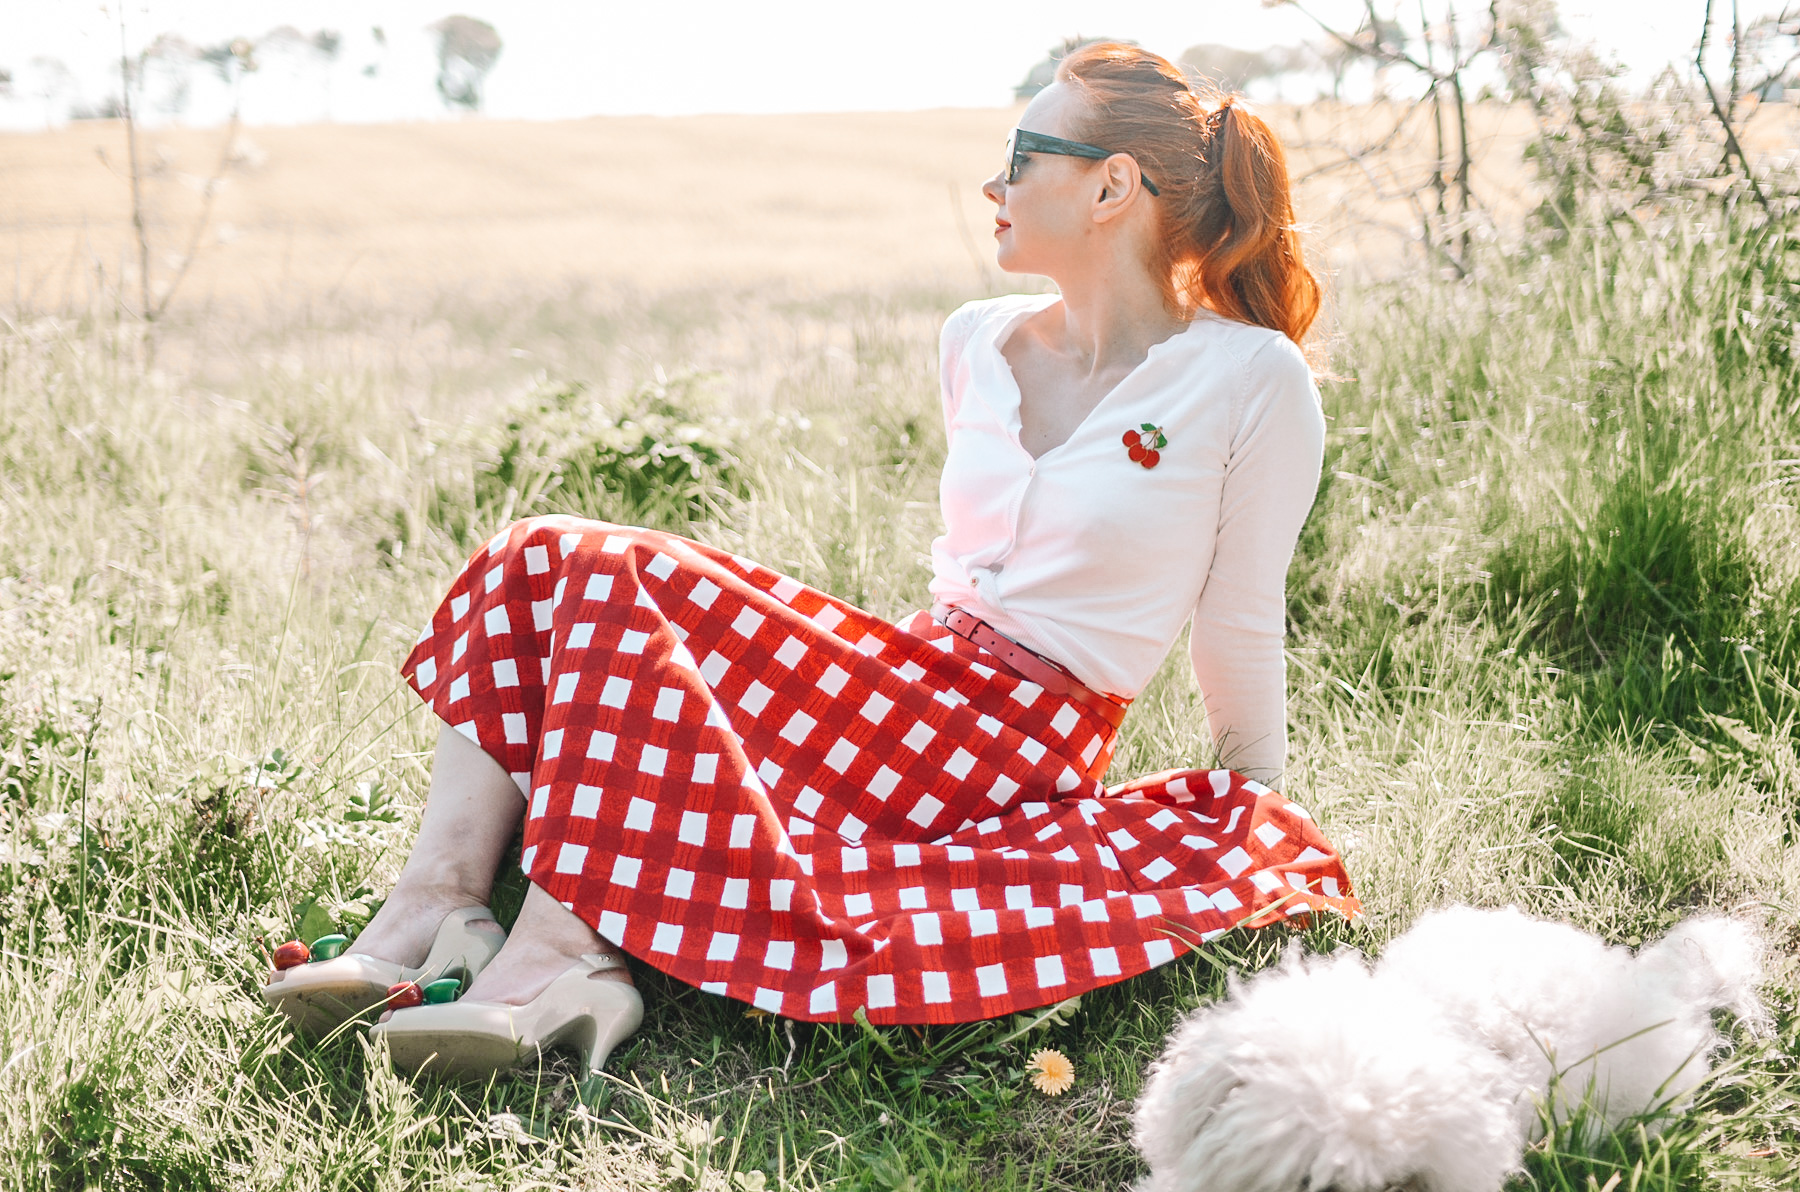 retro-inspired outfit featuring red gingham circle skirt and cherry cardigan